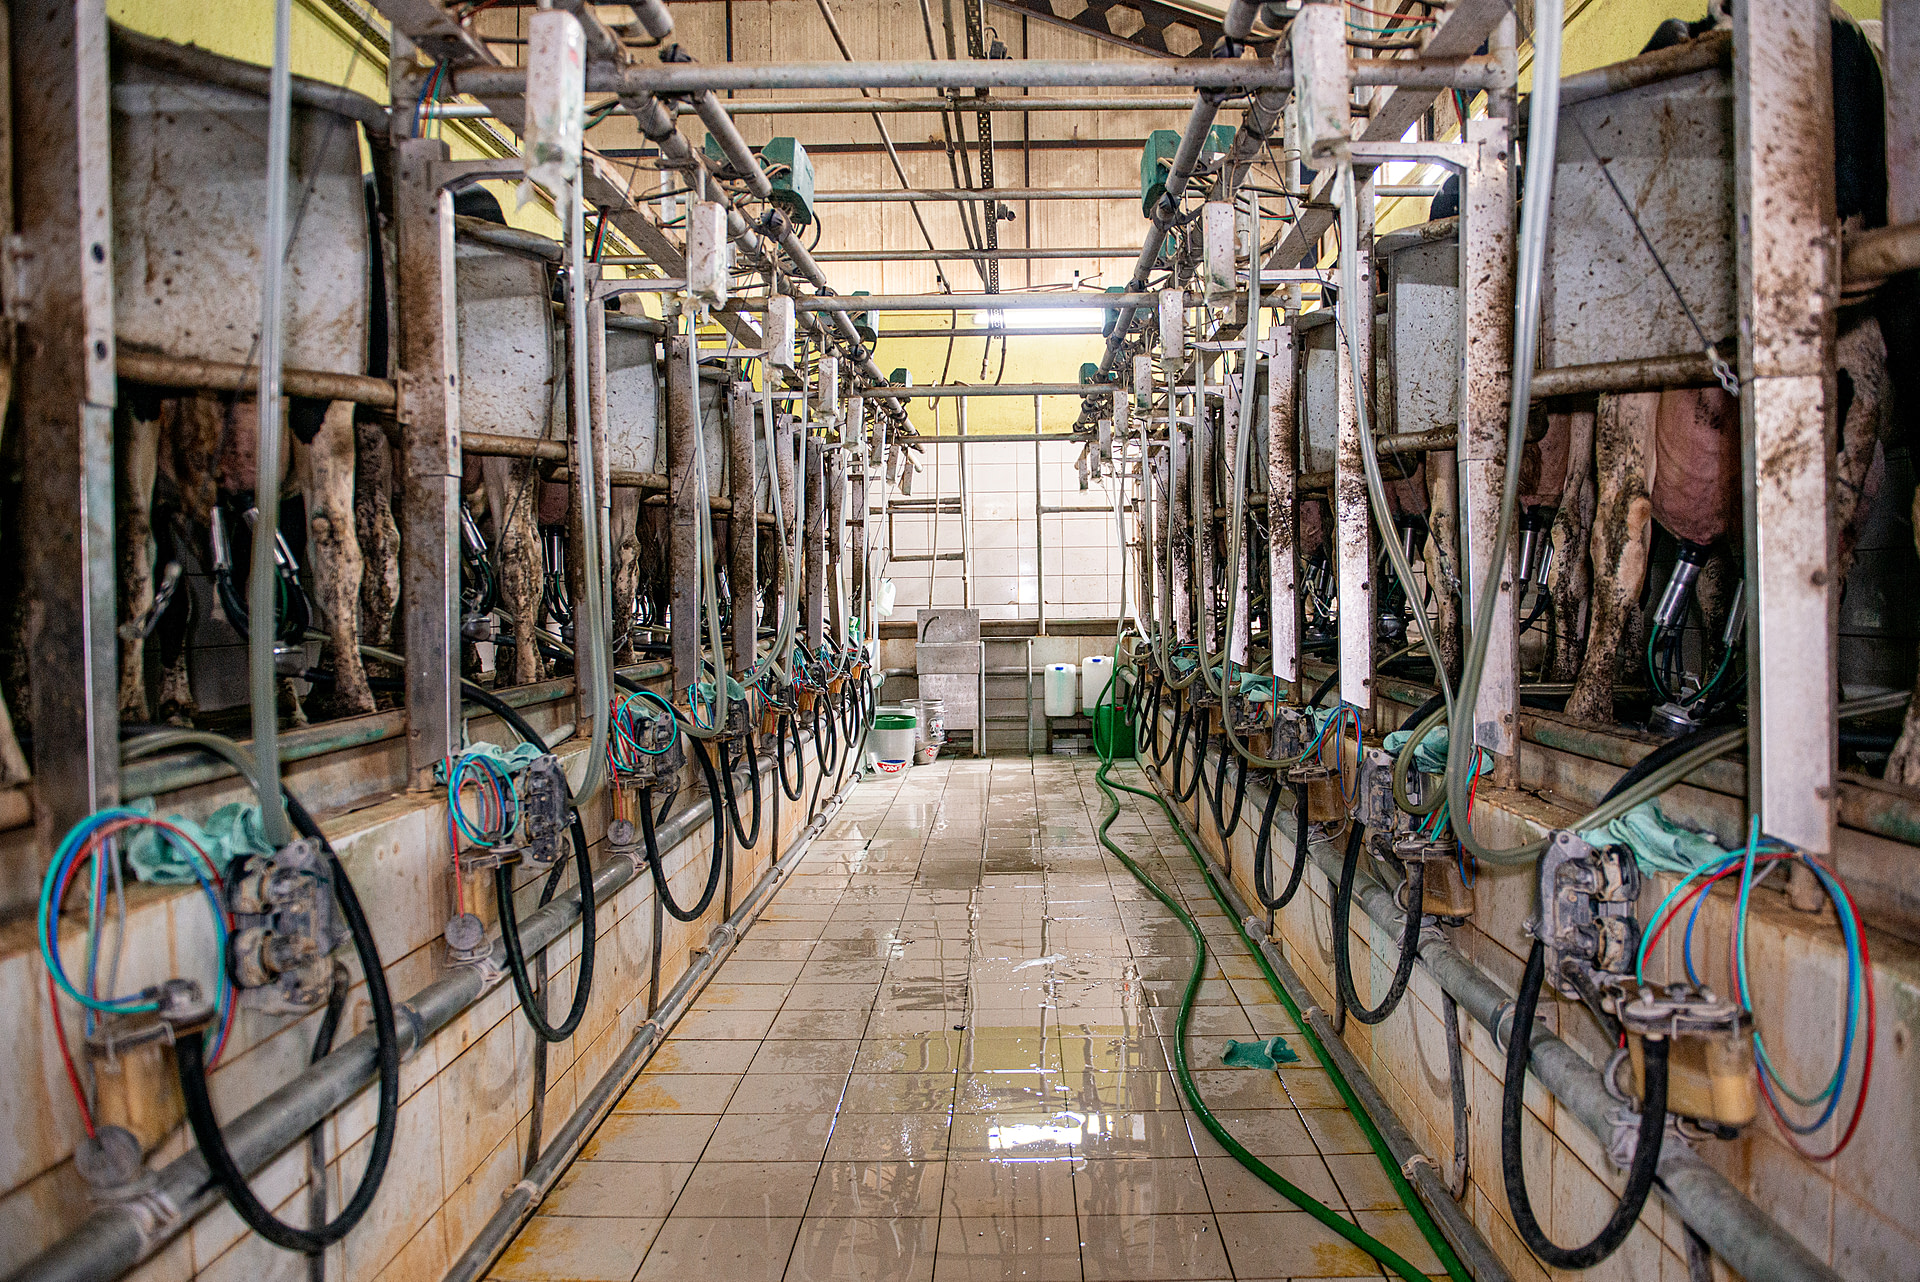 Multiple cows confined to stalls are milked simultaneously inside the milking parlour at a dairy farm in Turkiye.